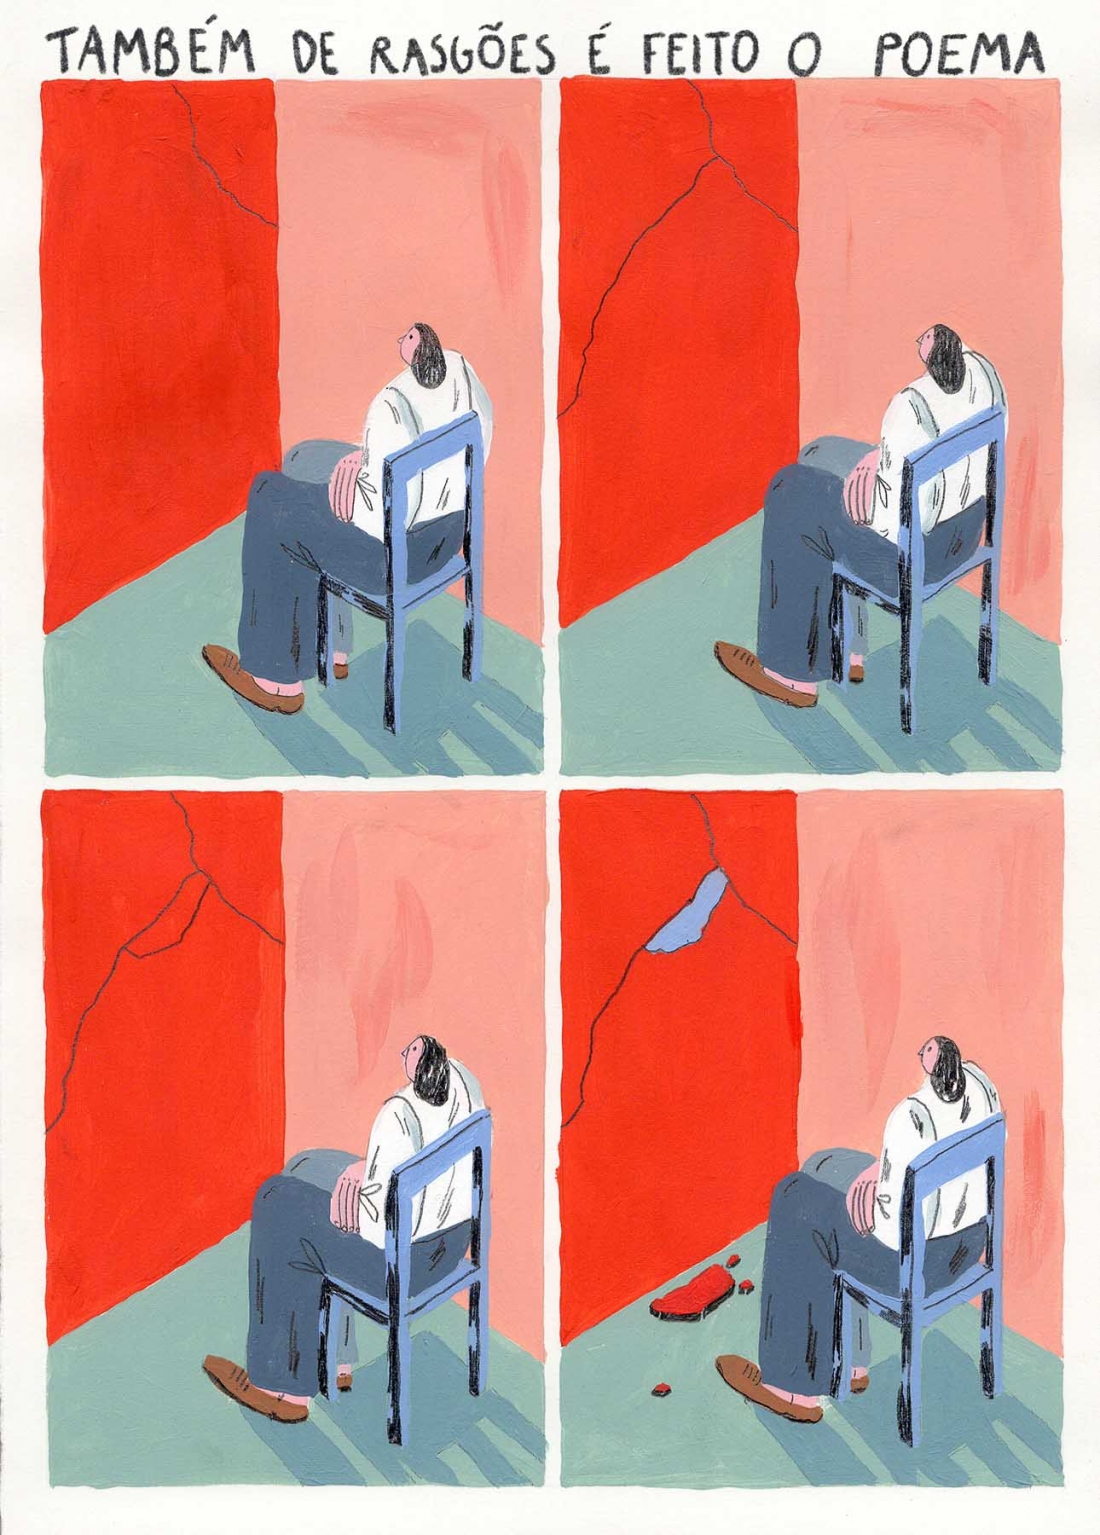 Color illustration. In the image, 4 moments of the same action are represented: a person sitting in a chair looking at a wall. As the action unfolds, the wall collapses. At the top it reads: 